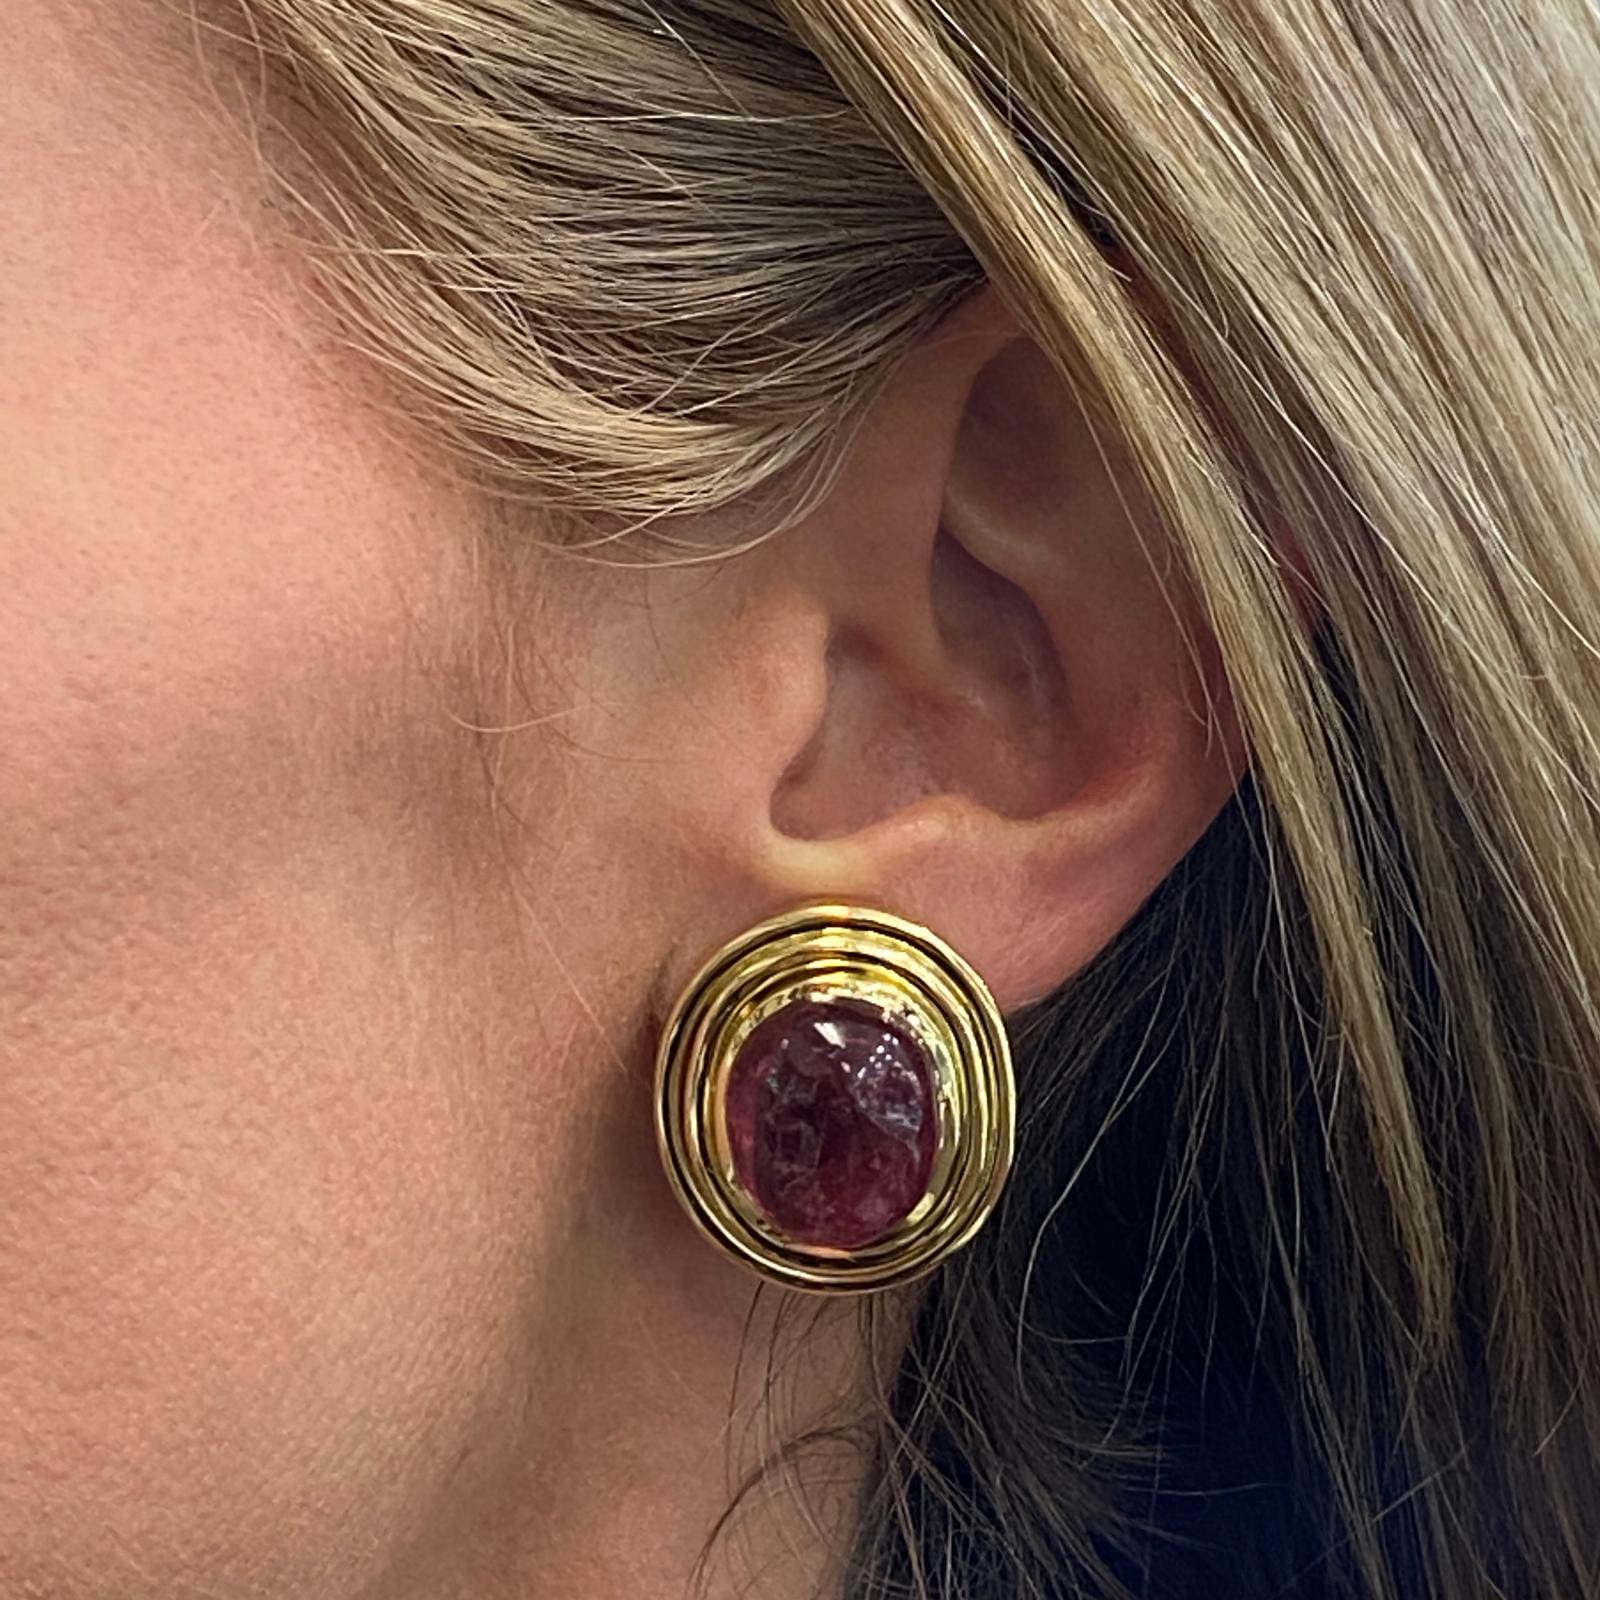 Beautiful pink rubelite earrings fashioned in 18 karat yellow gold by English designer Leo DeVroomen. The earrings feature oval cabochon rubelite pink gemstones set in ribbed 18 karat yellow gold. The earrings are clip backs, measure 20 x 28mm. and